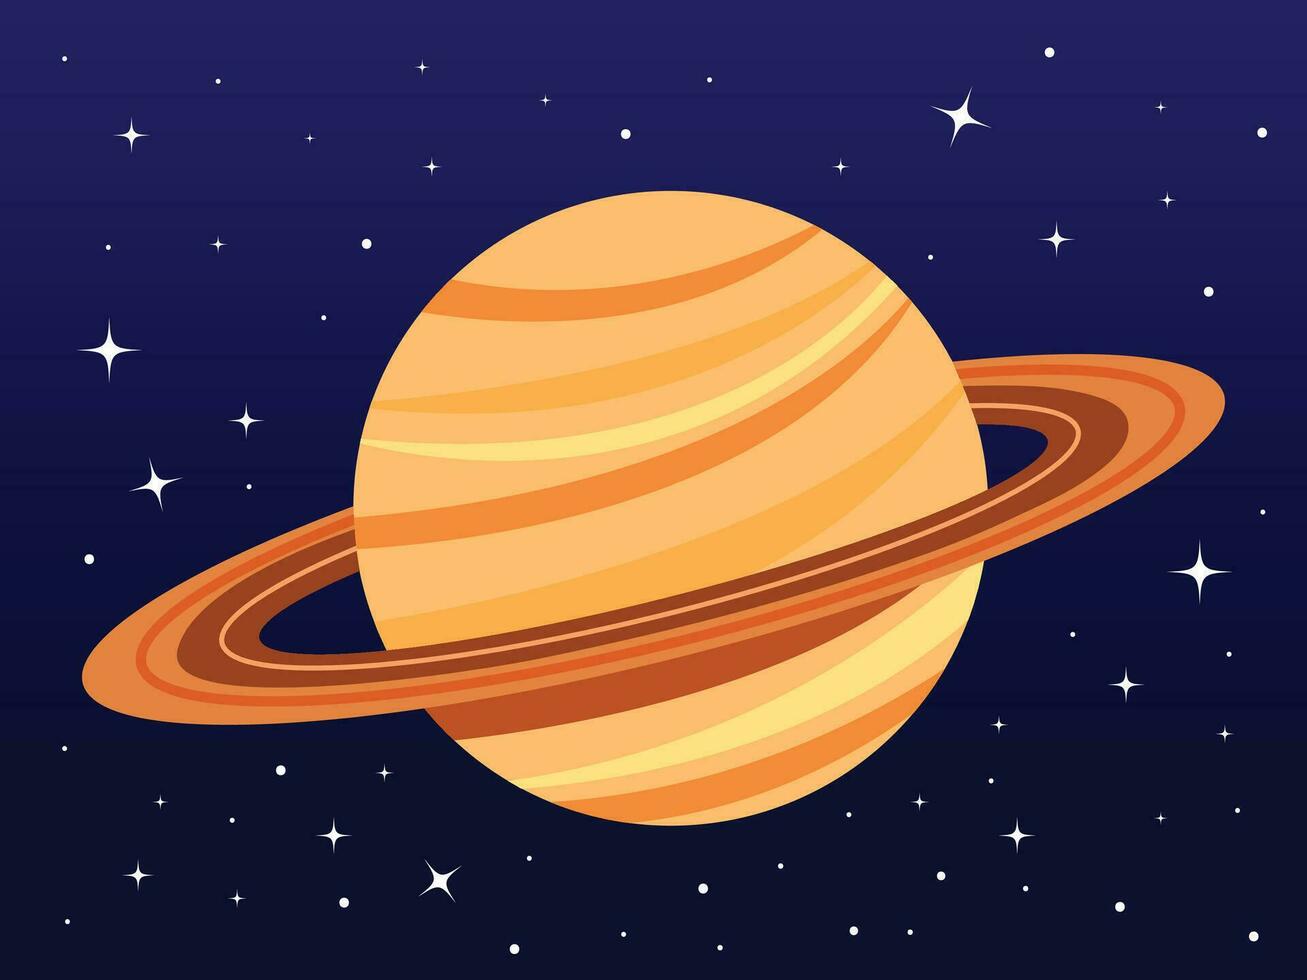 Saturn planet vector illustration isolated on dark sky with stars background. Saturnus planet with ring. Simple flat cartoon art styled astronomy themed drawing.